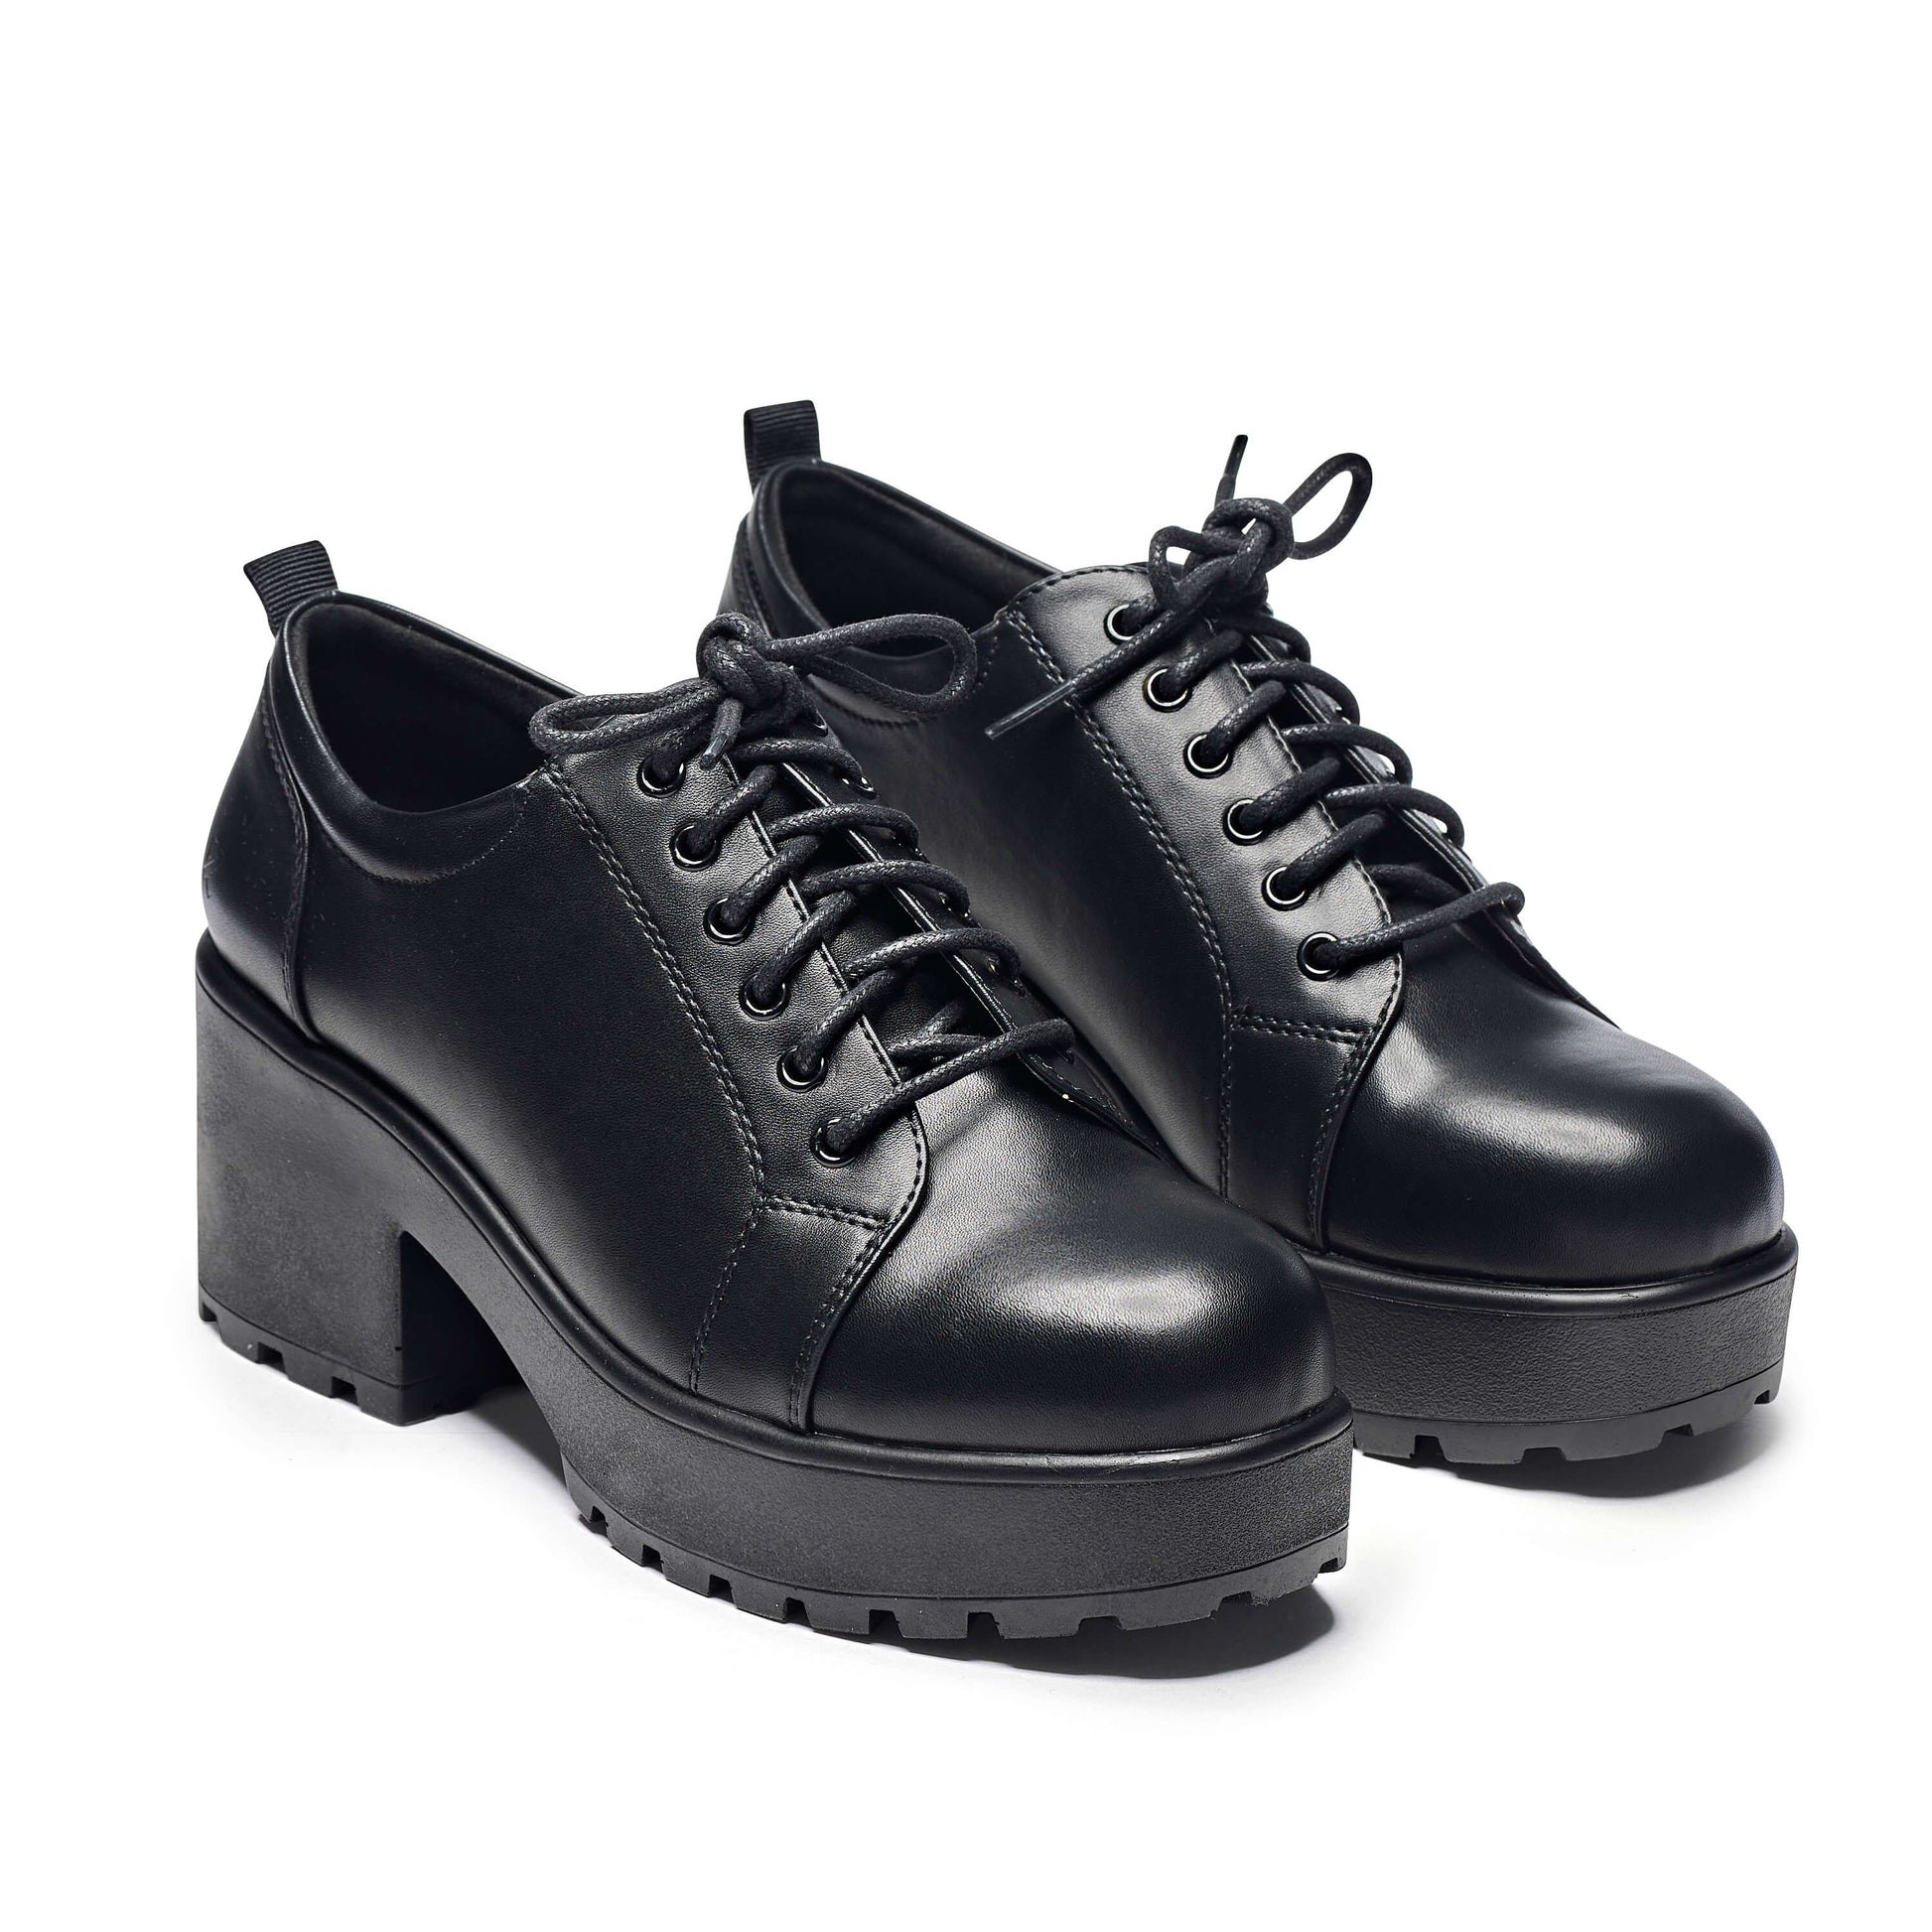 Rei Reloaded Chunky Shoes - Shoes - KOI Footwear - Black - Three-Quarter View